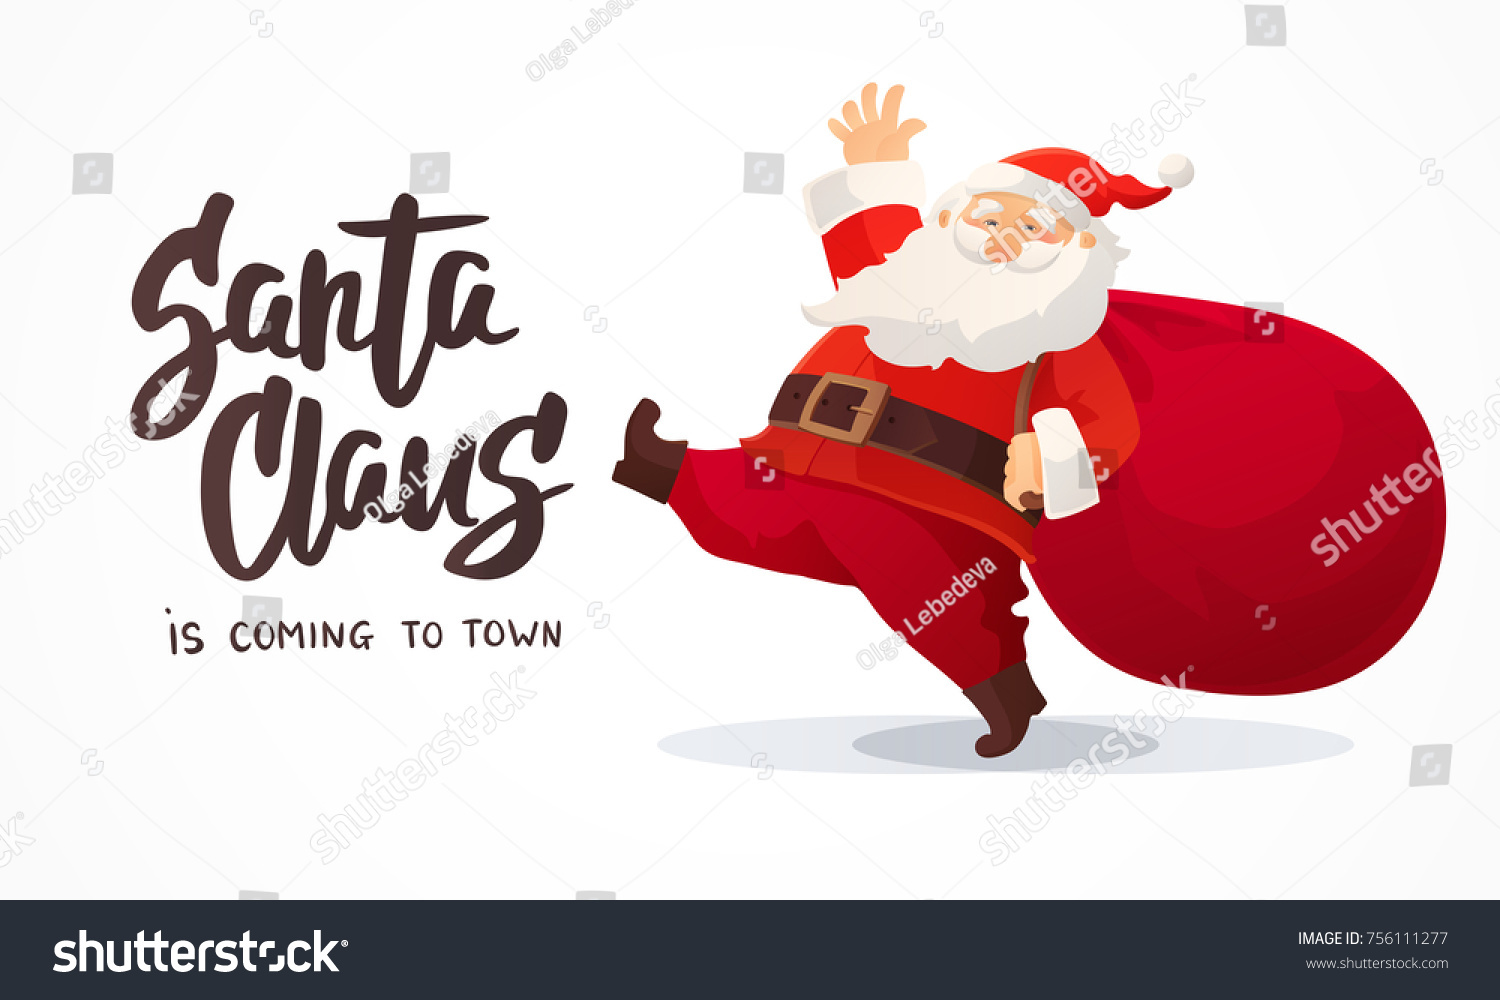 Christmas card. Funny cartoon Santa Claus with huge red bag with presents. Hand drawn text - Santa Claus is coming to town. Red Santa hat. For Christmas and New Year posters, gift tags and labels #756111277